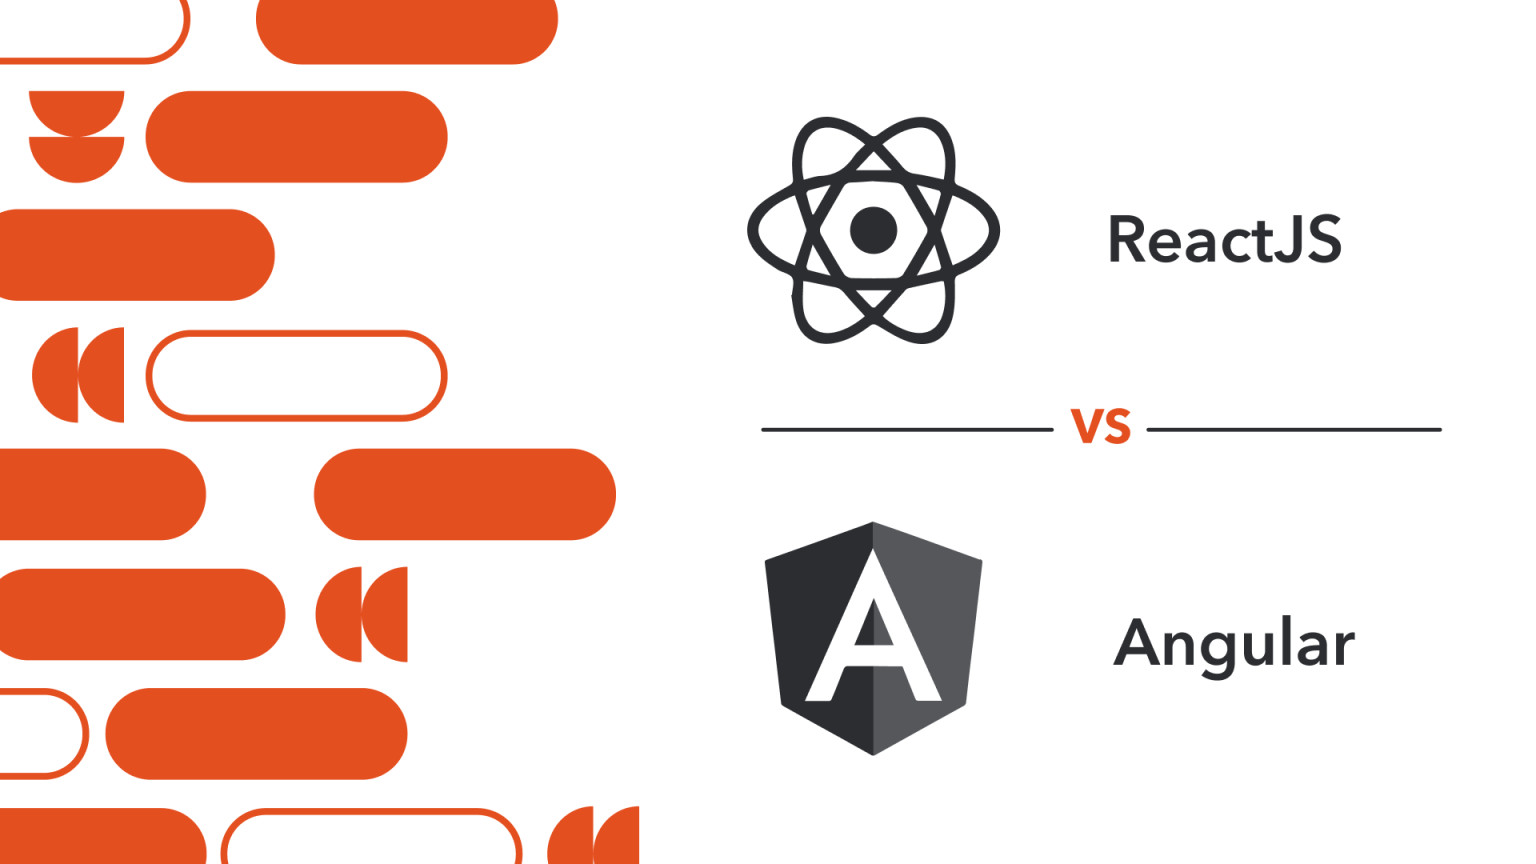 React and Angular are different JavaScript libraries that help you build websites and apps. Which one is easiest to learn, and which is best for your project?